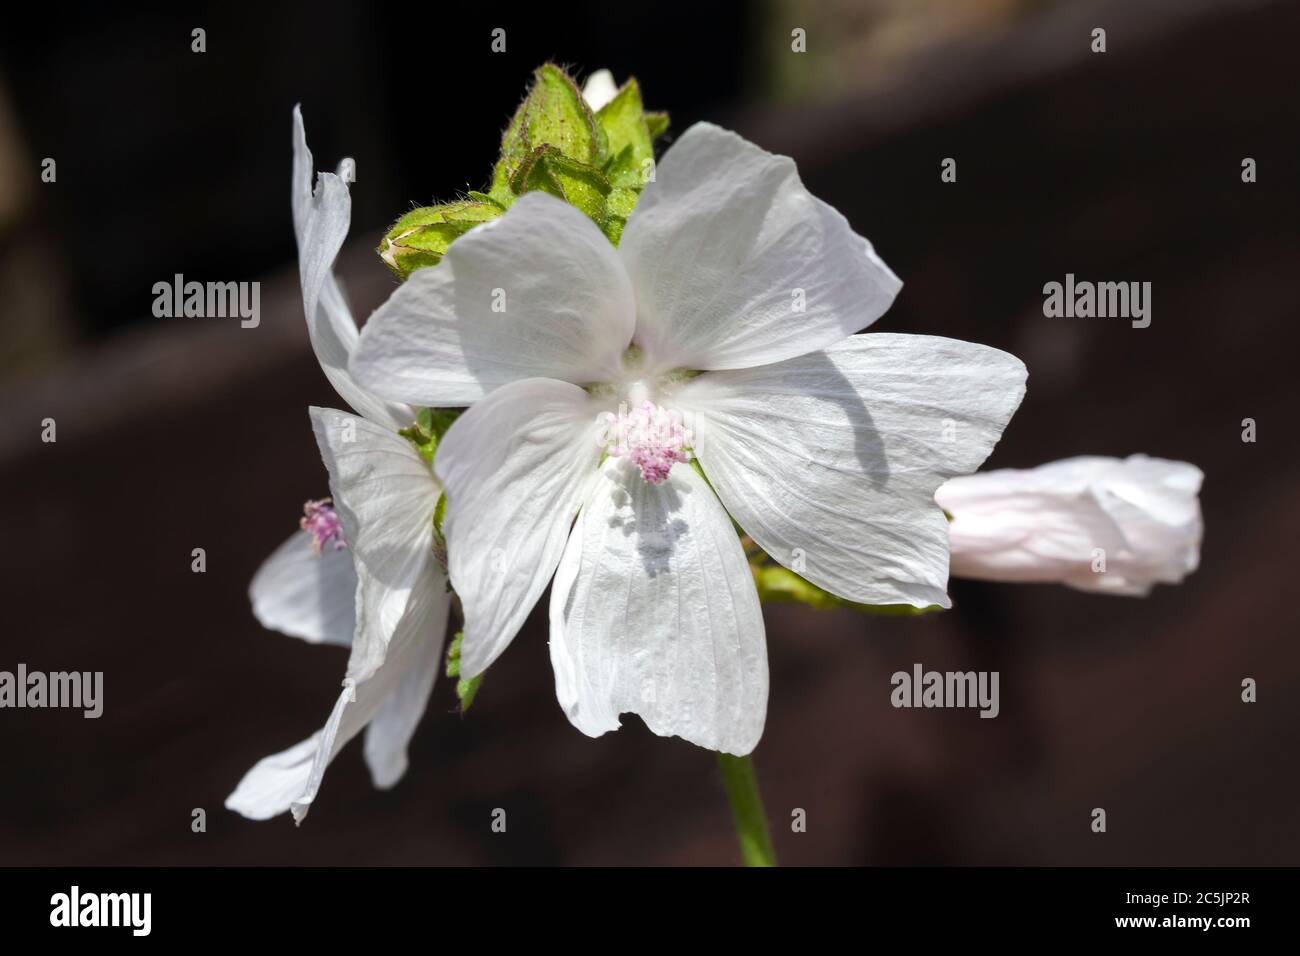 Malva 'Alba' a white herbaceous springtime summer flower plant commonly known as musk mallow Stock Photo